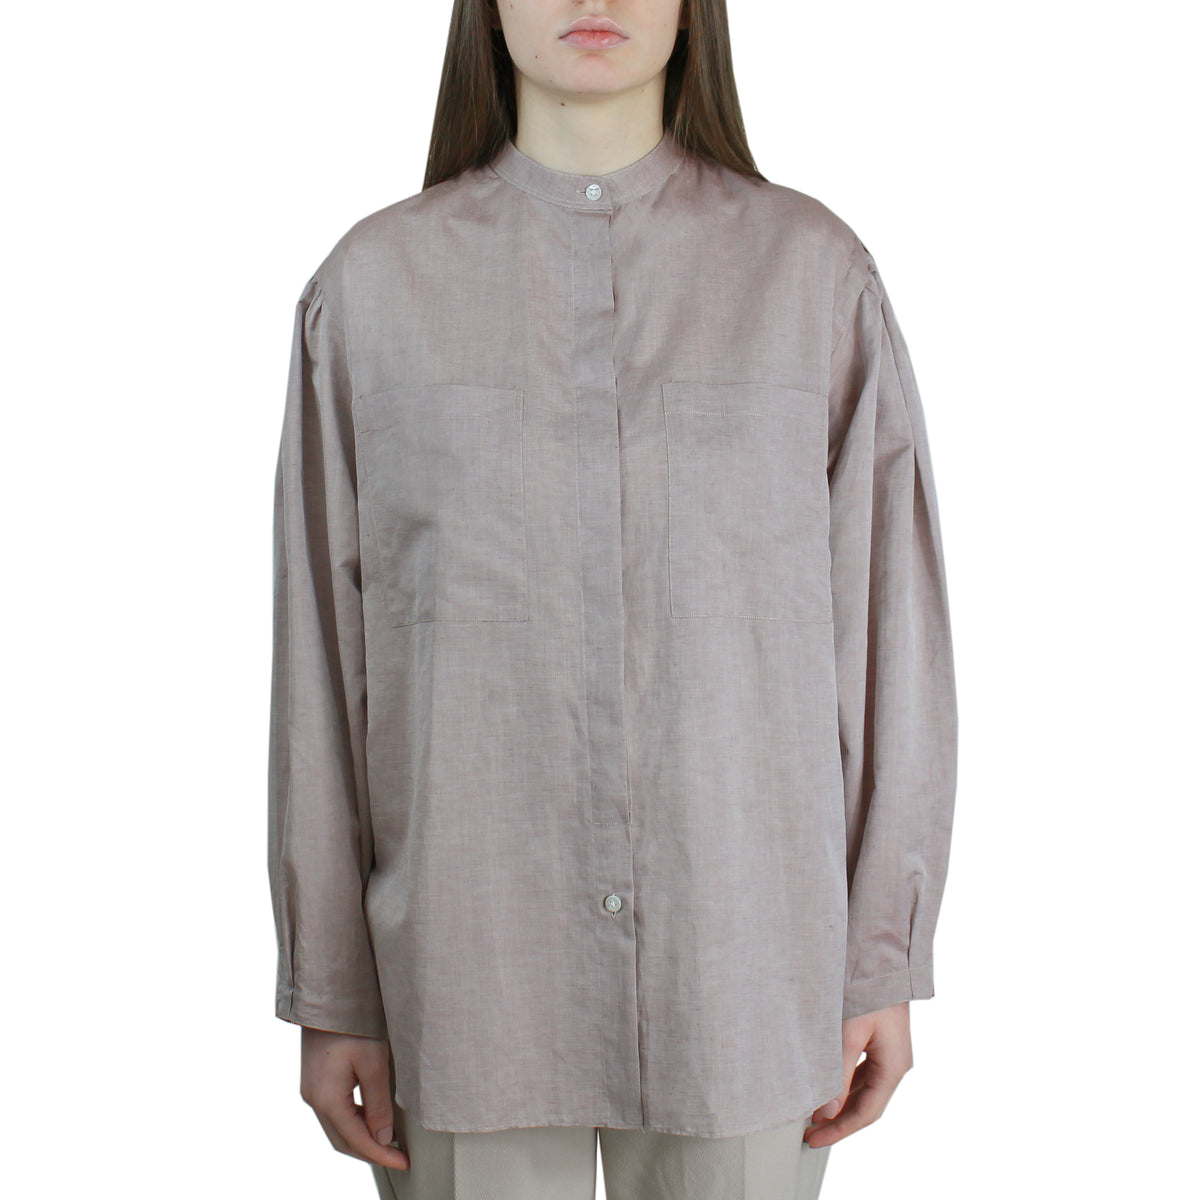 Women's over fit shirt with front pockets and arriccio on the sleeve